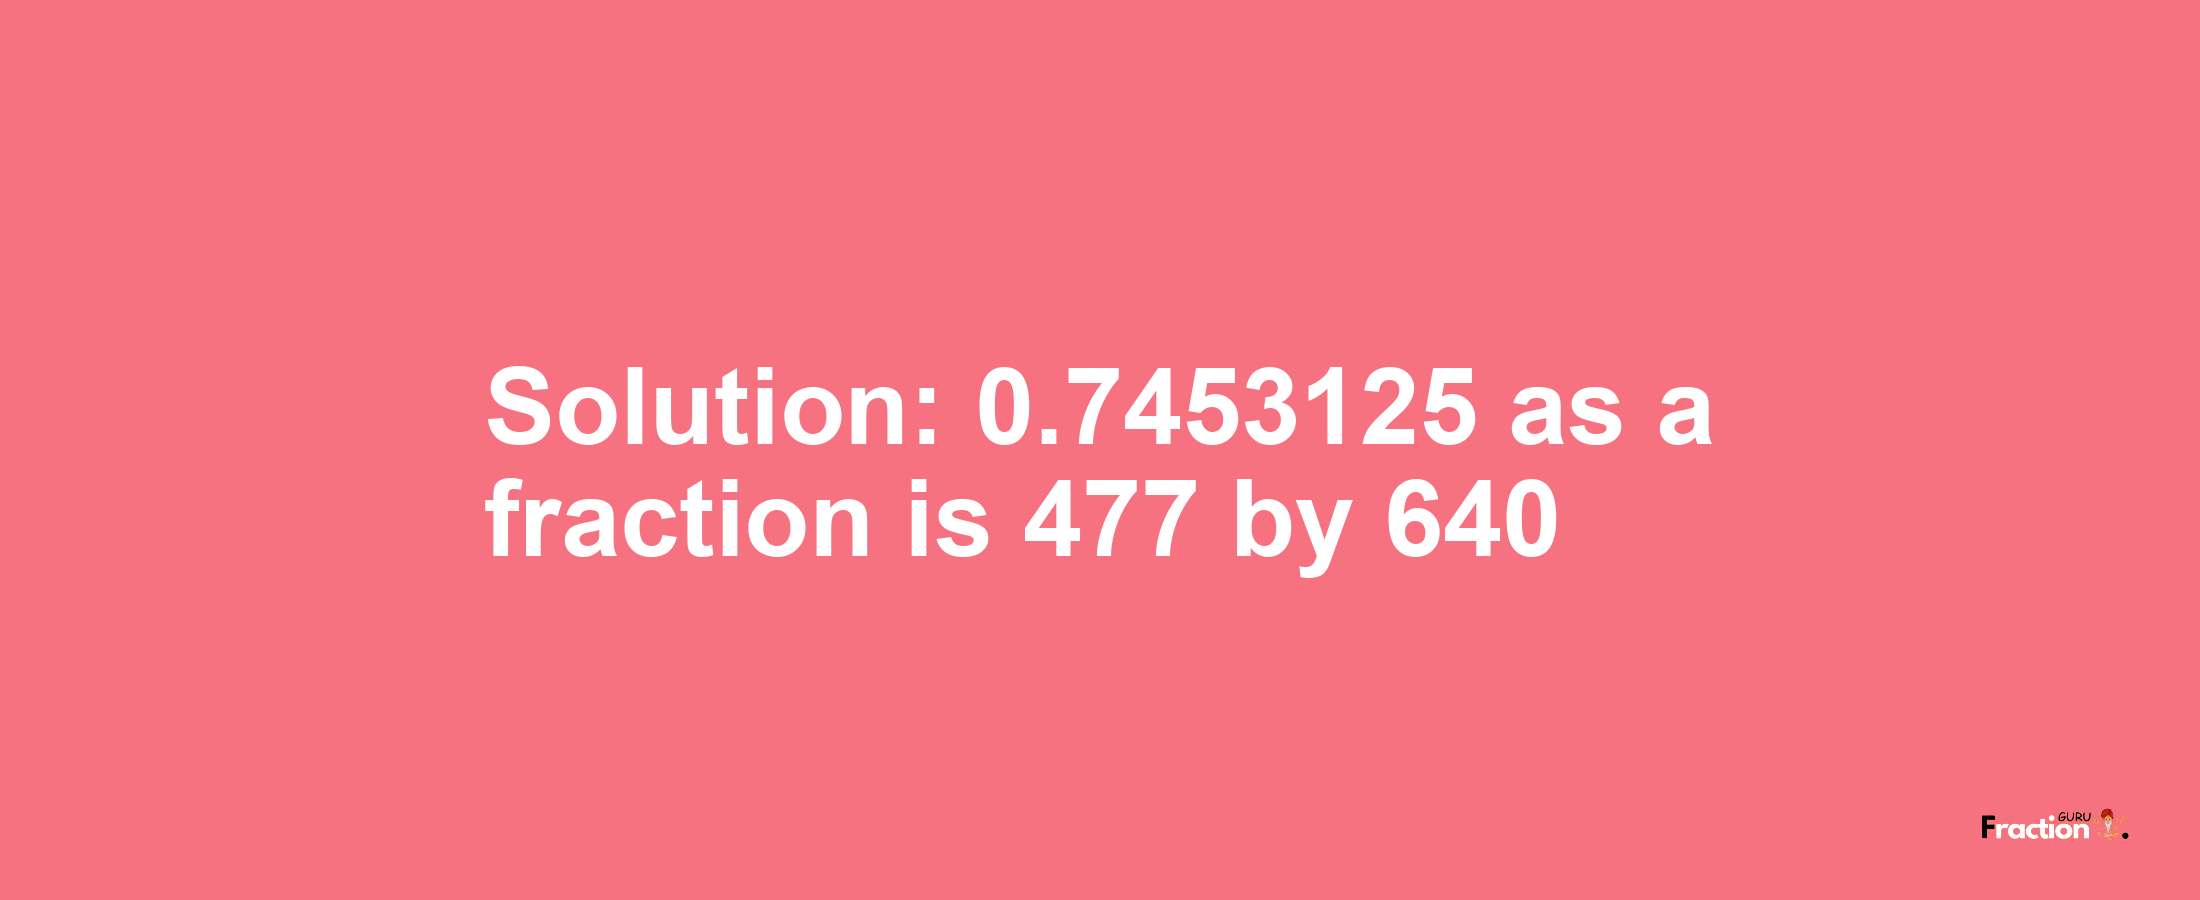 Solution:0.7453125 as a fraction is 477/640